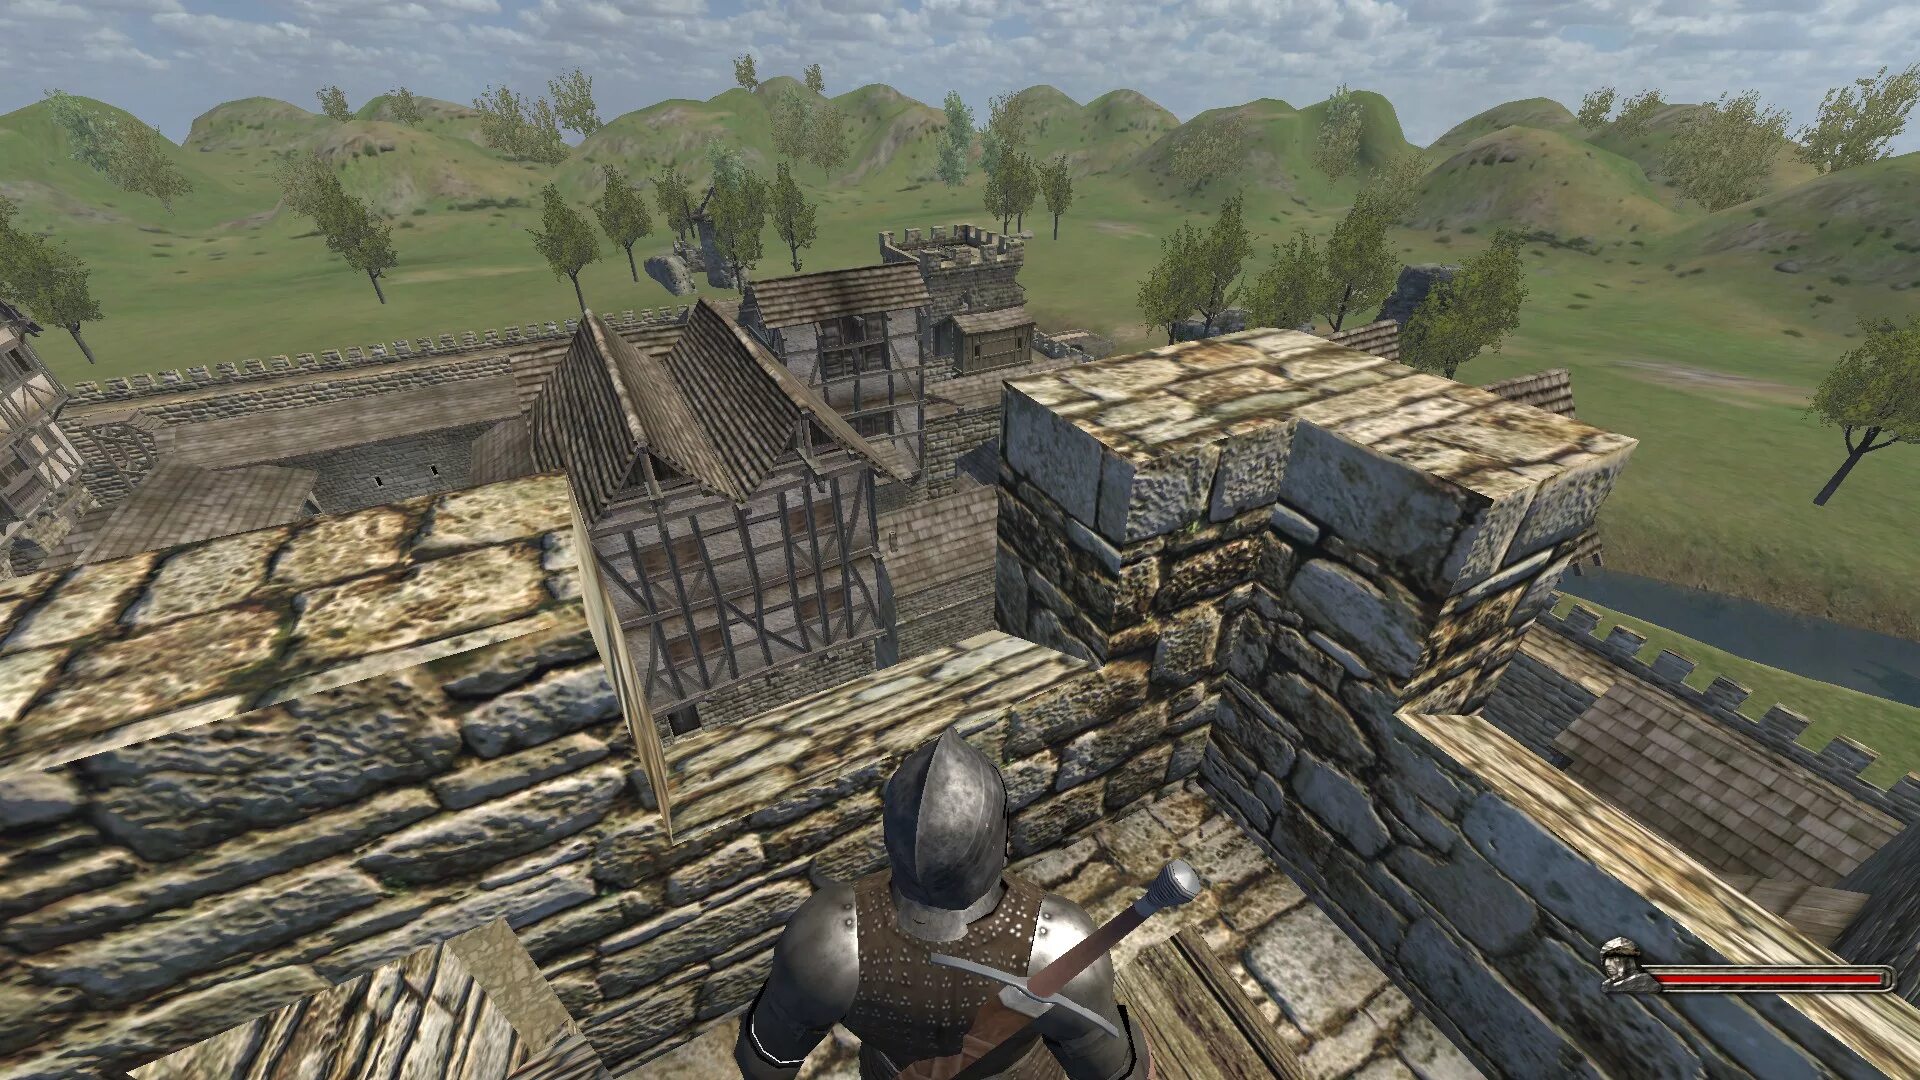 Mount and Blade город. Mount and Blade Warband City. Warband Rust. Warband Parabellum.